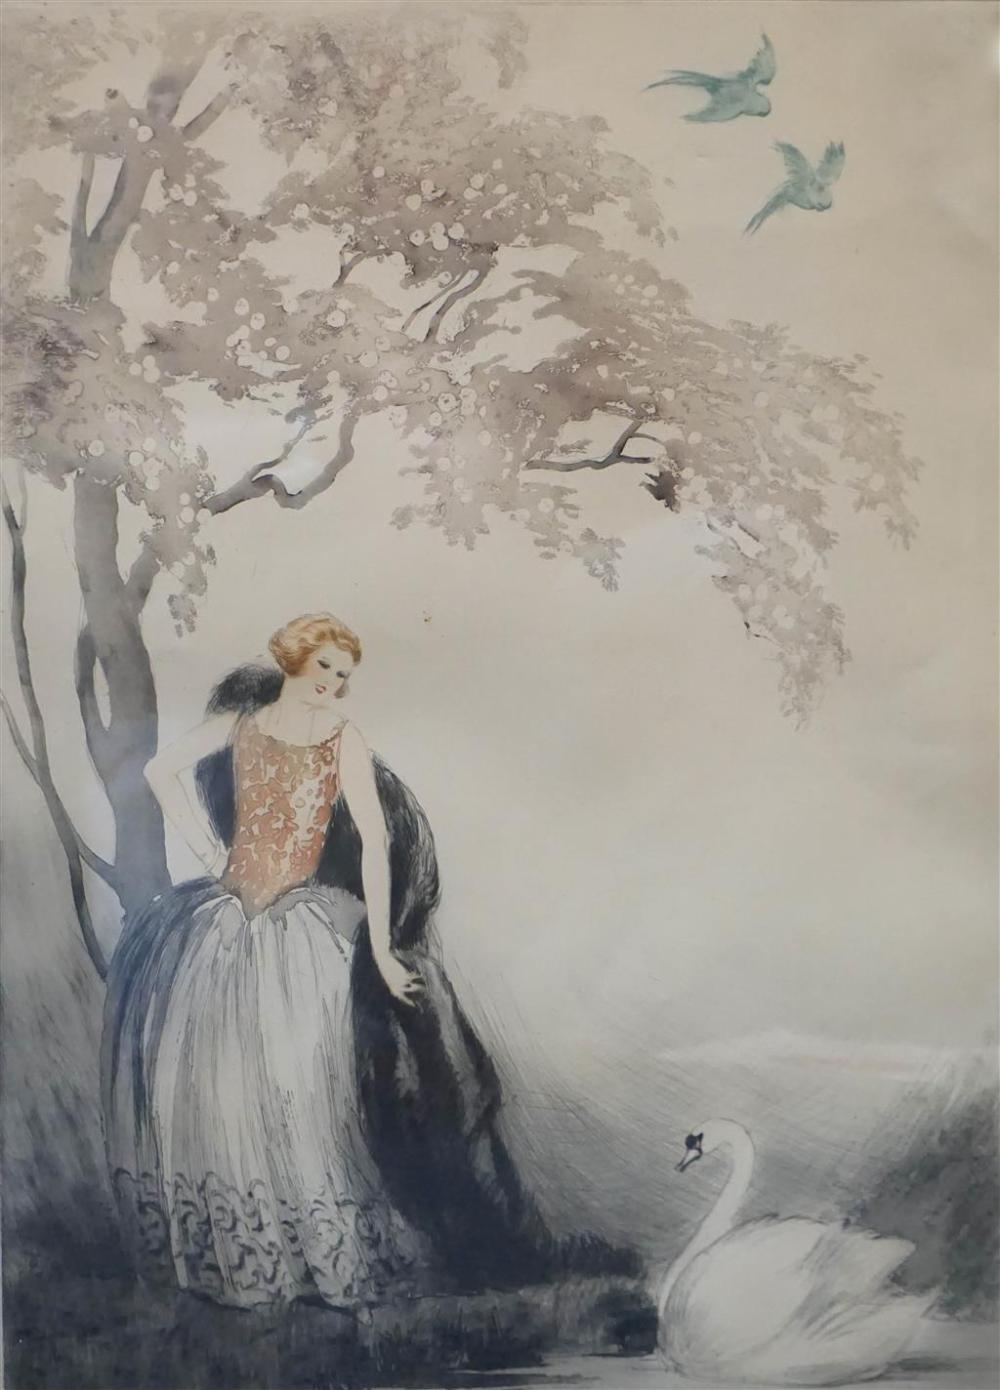 J. HARDY, WOMAN AND SWAN, DRYPOINT